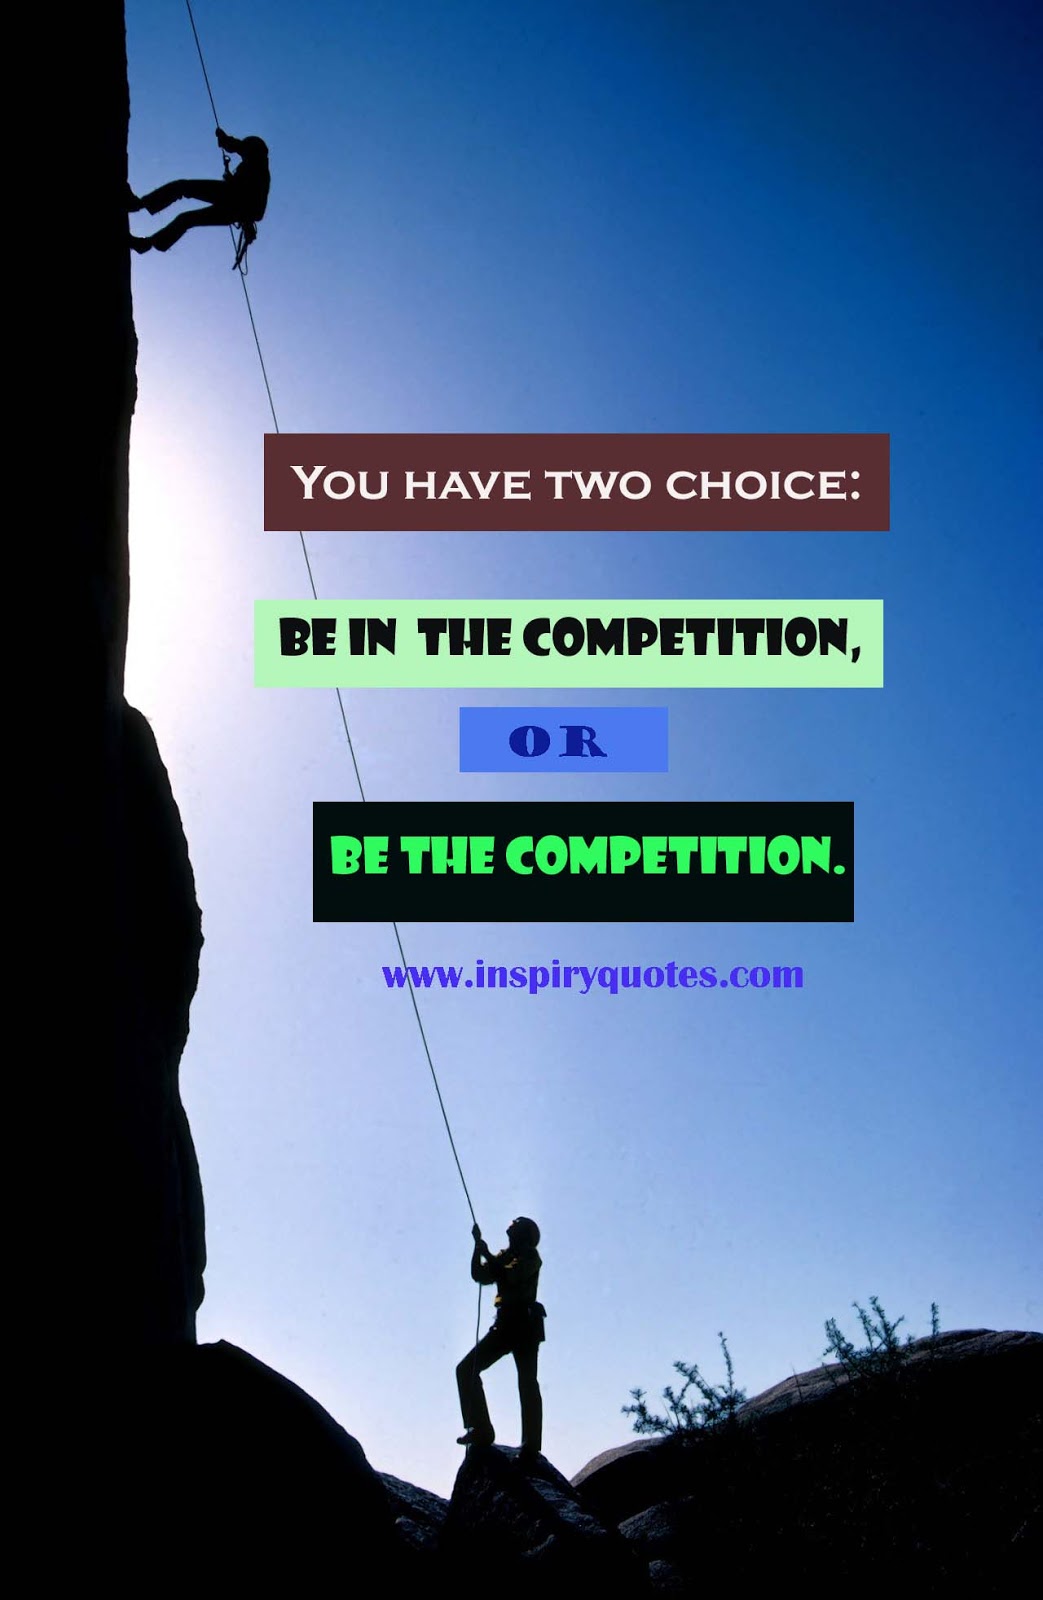 Inspirational Motivational Competition Quotes For Student Success In